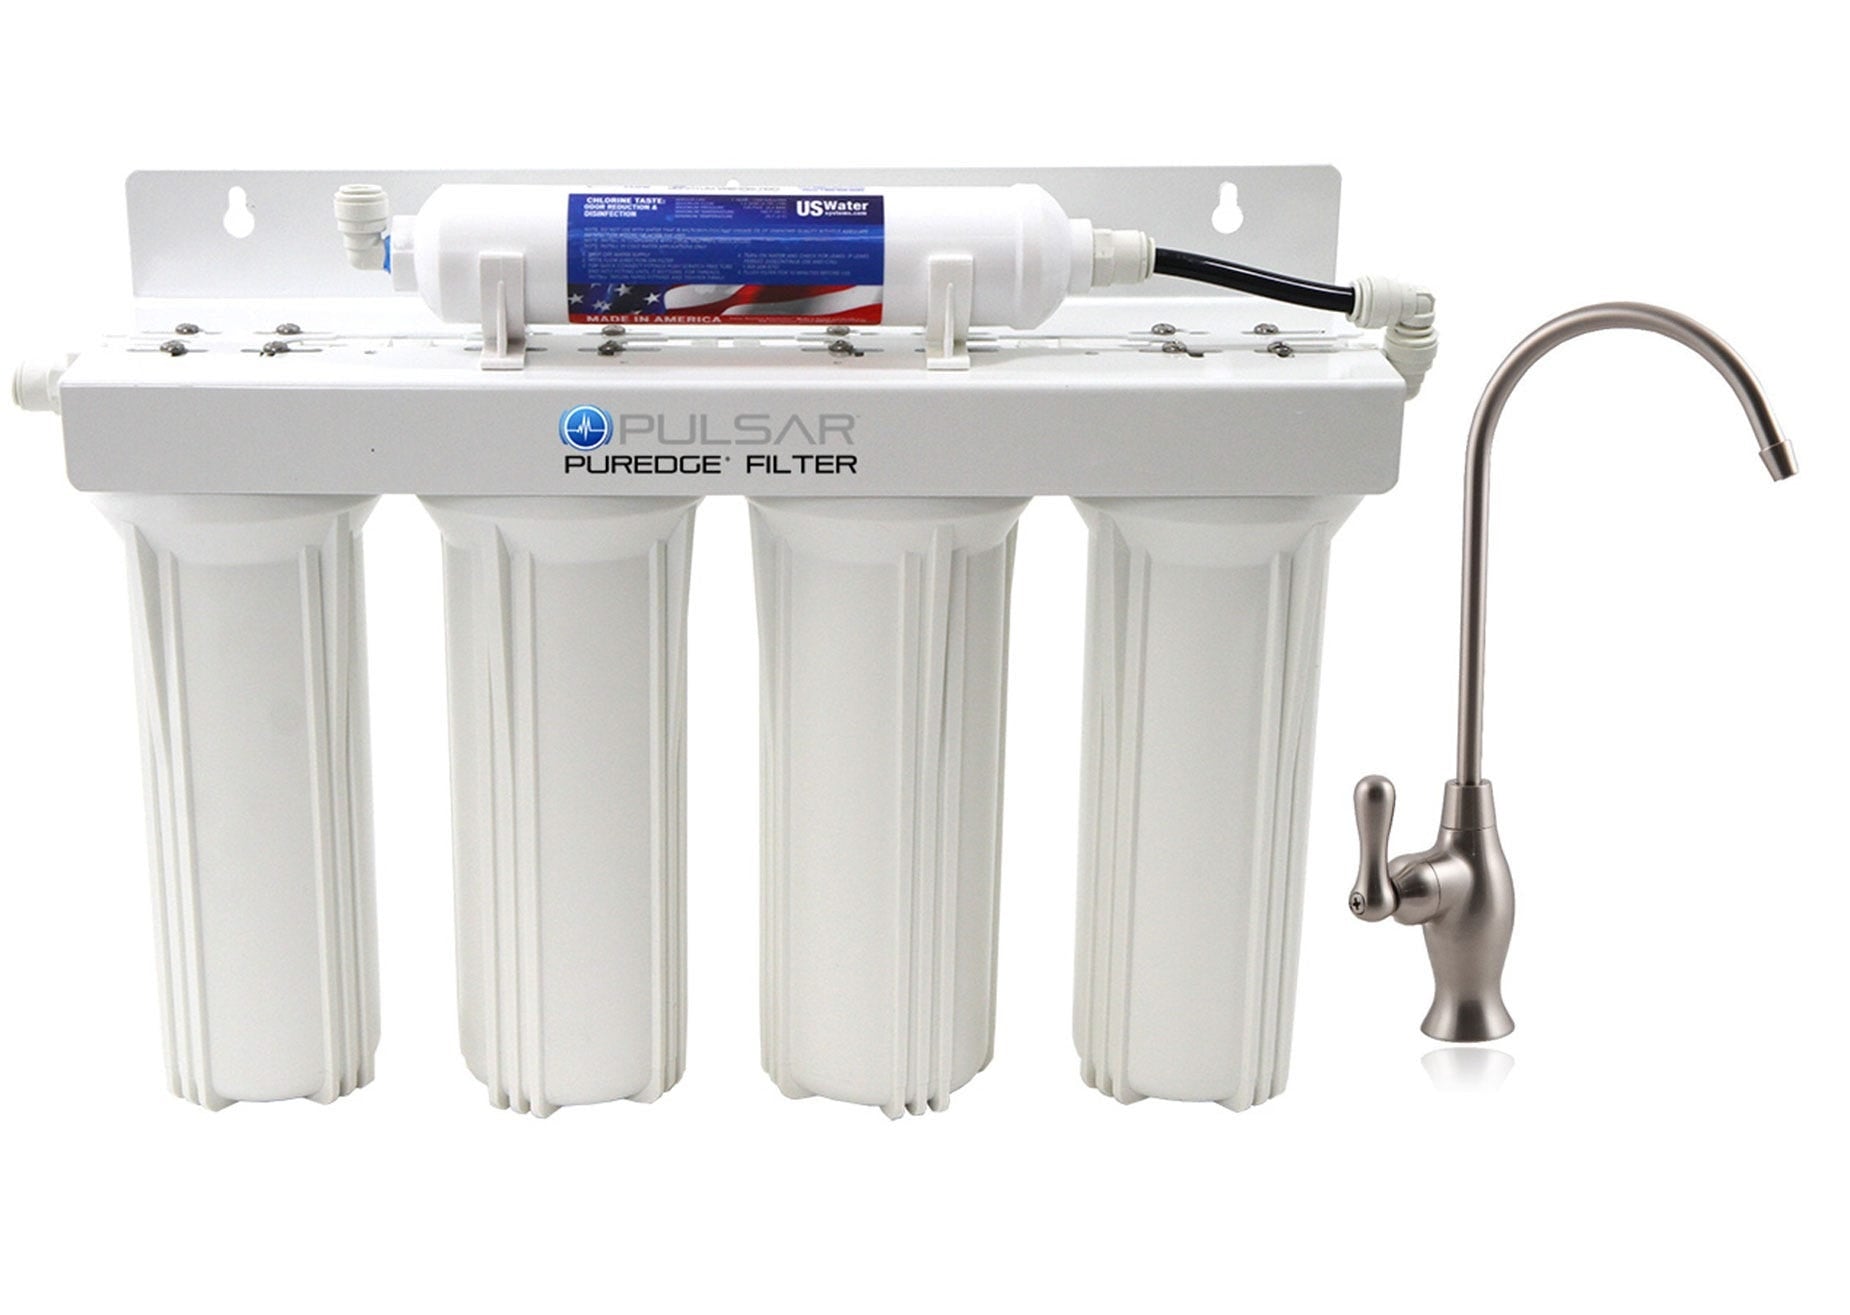 US Water PurEdge5 Five-Stage Drinking Water Purification System